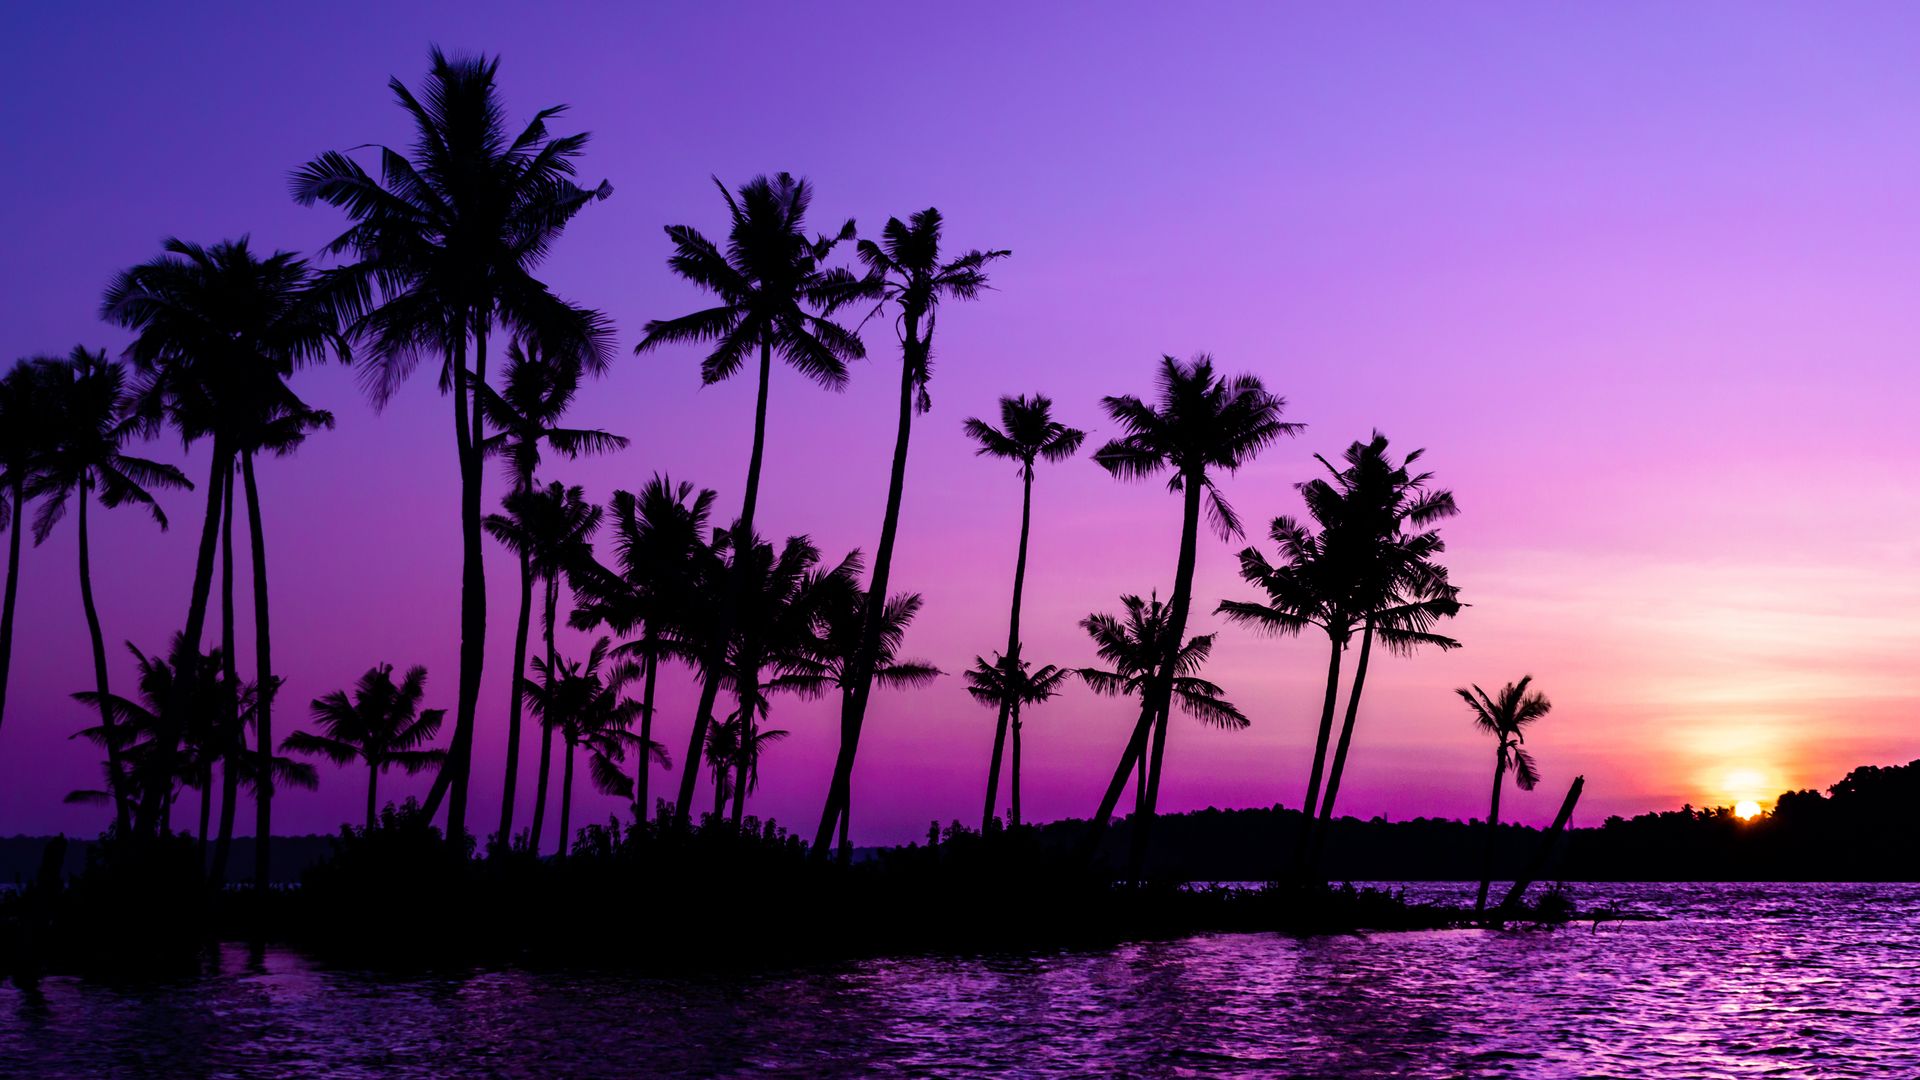 Download wallpaper 1920x1080 palm trees, silhouette, sunset, purple ...